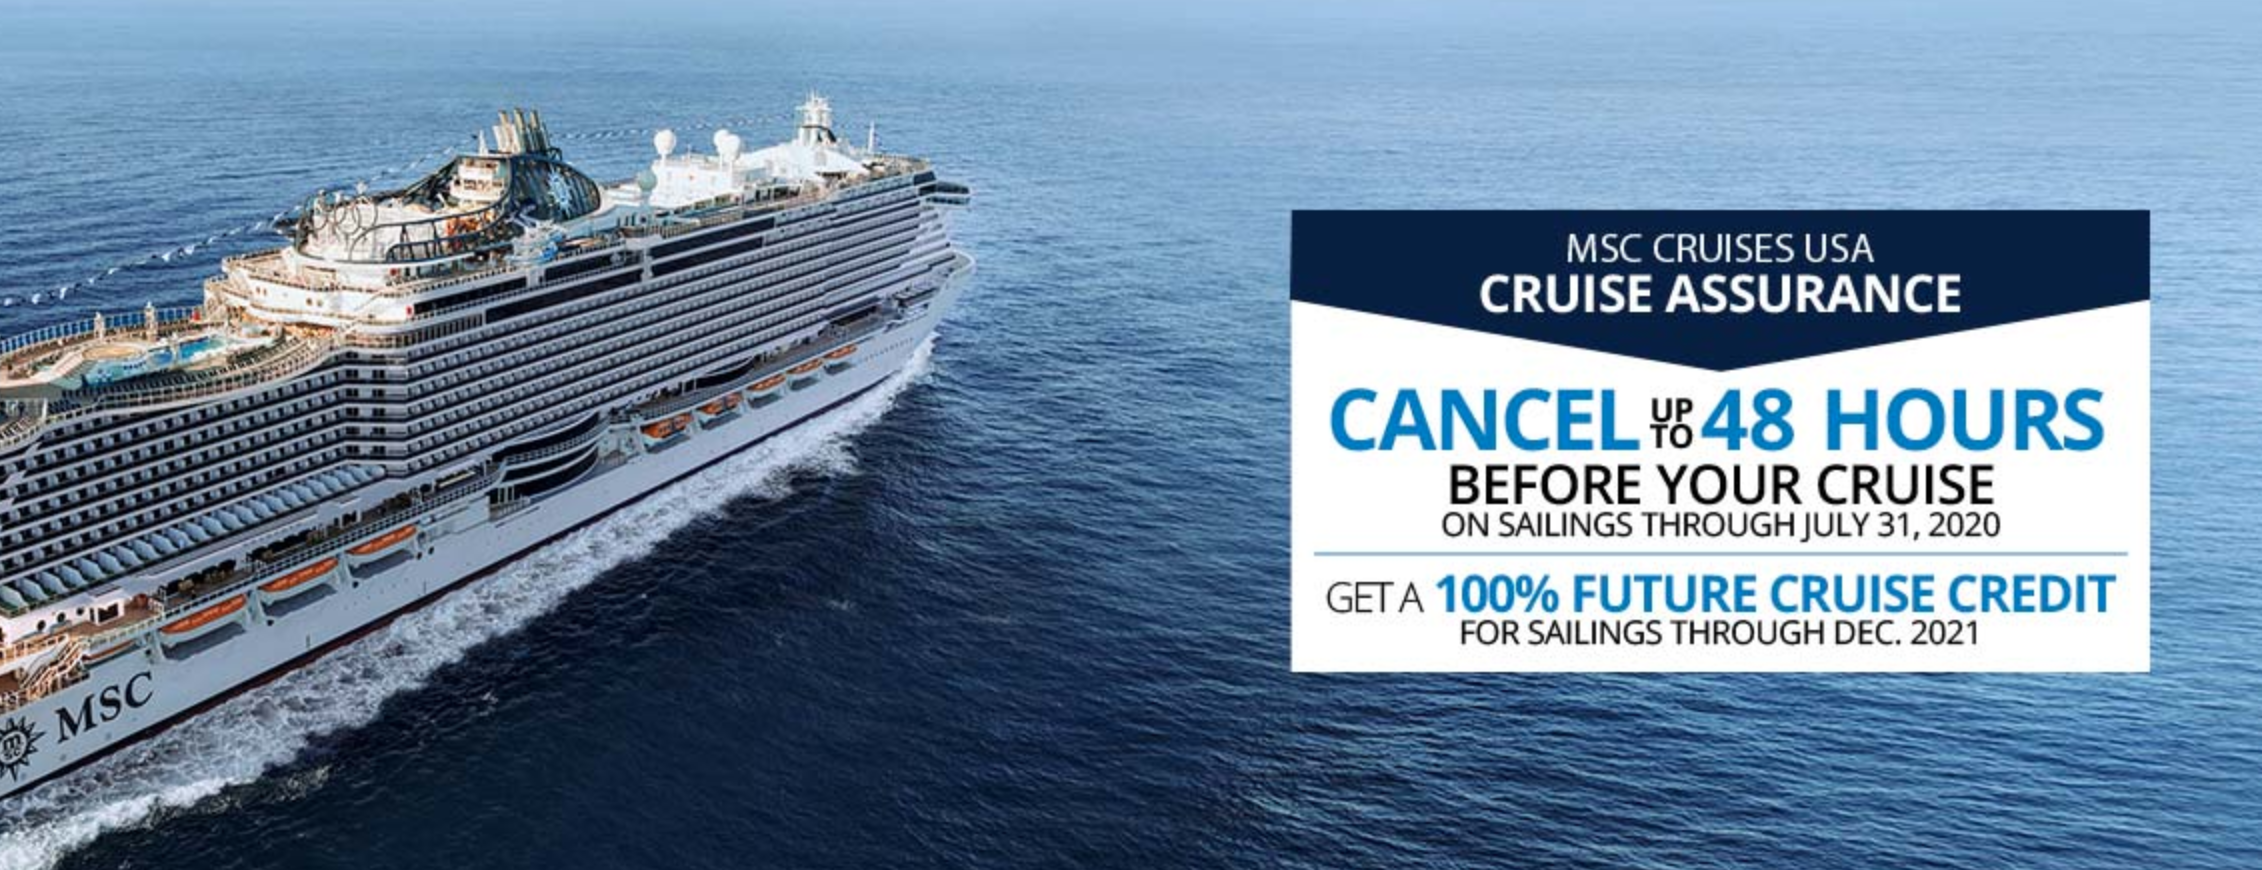 variety cruises cancellation policy